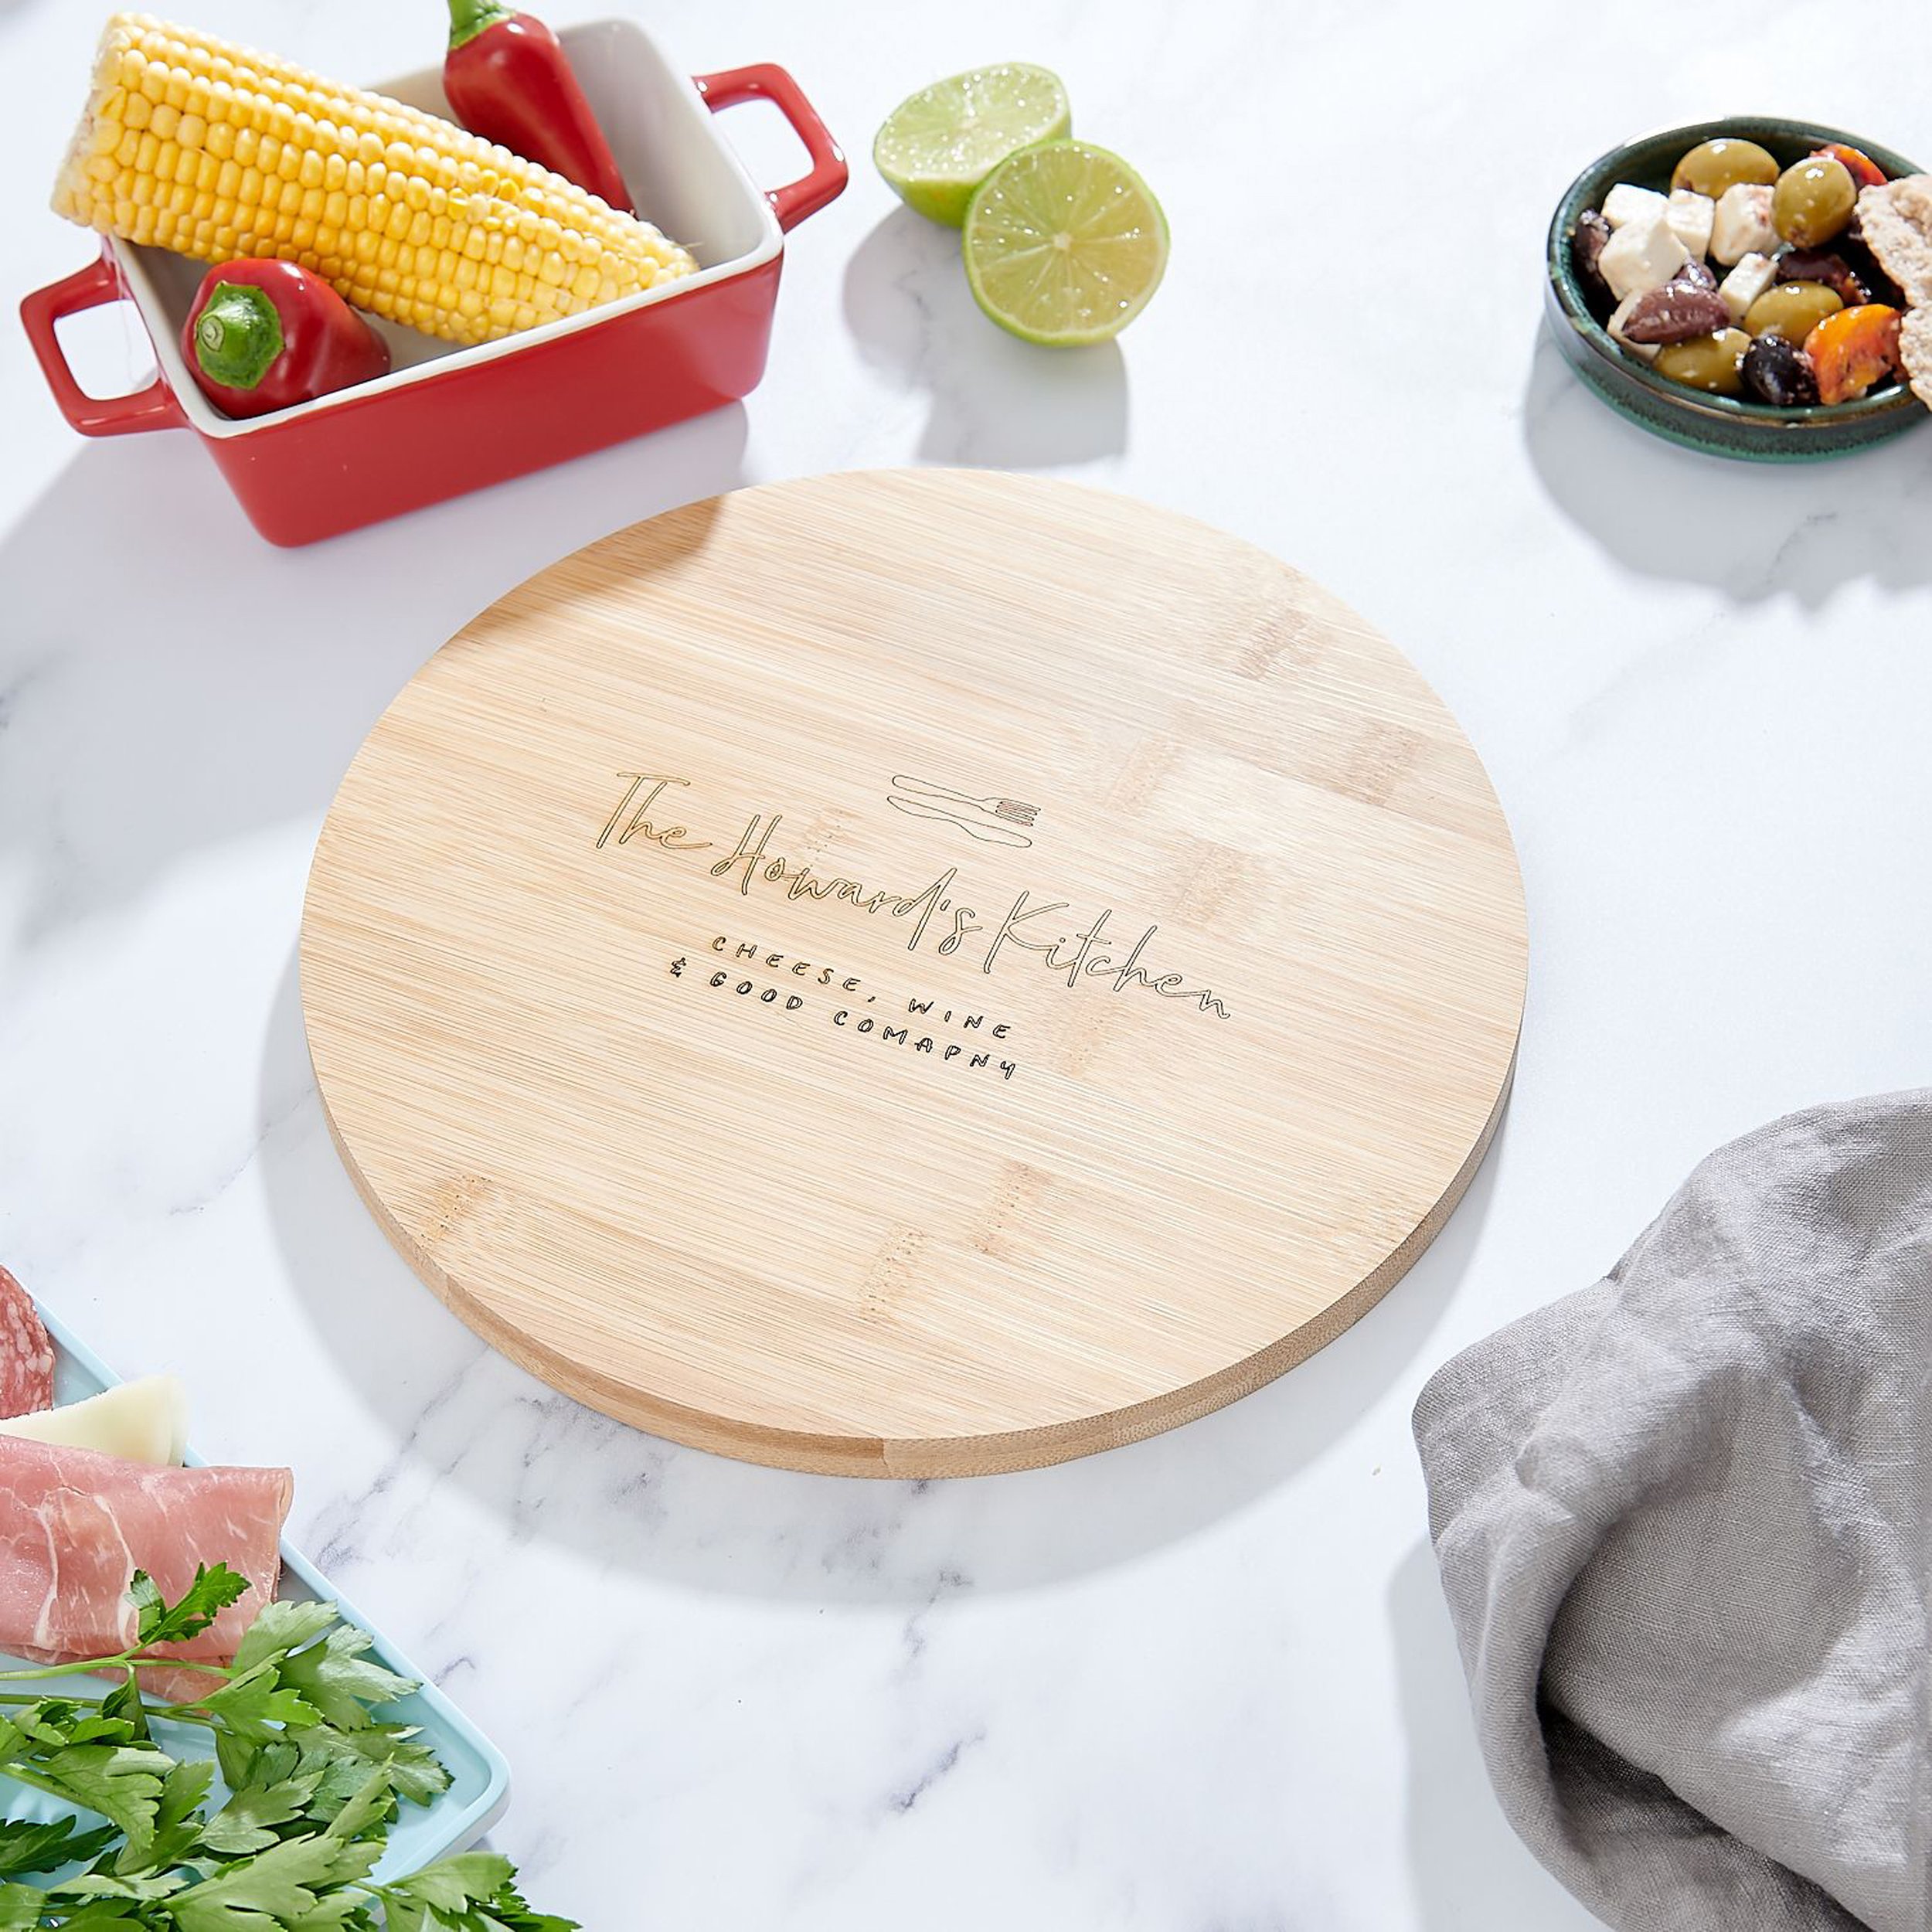 7. Personalised Wooden Family Cheeseboard €30.64, 